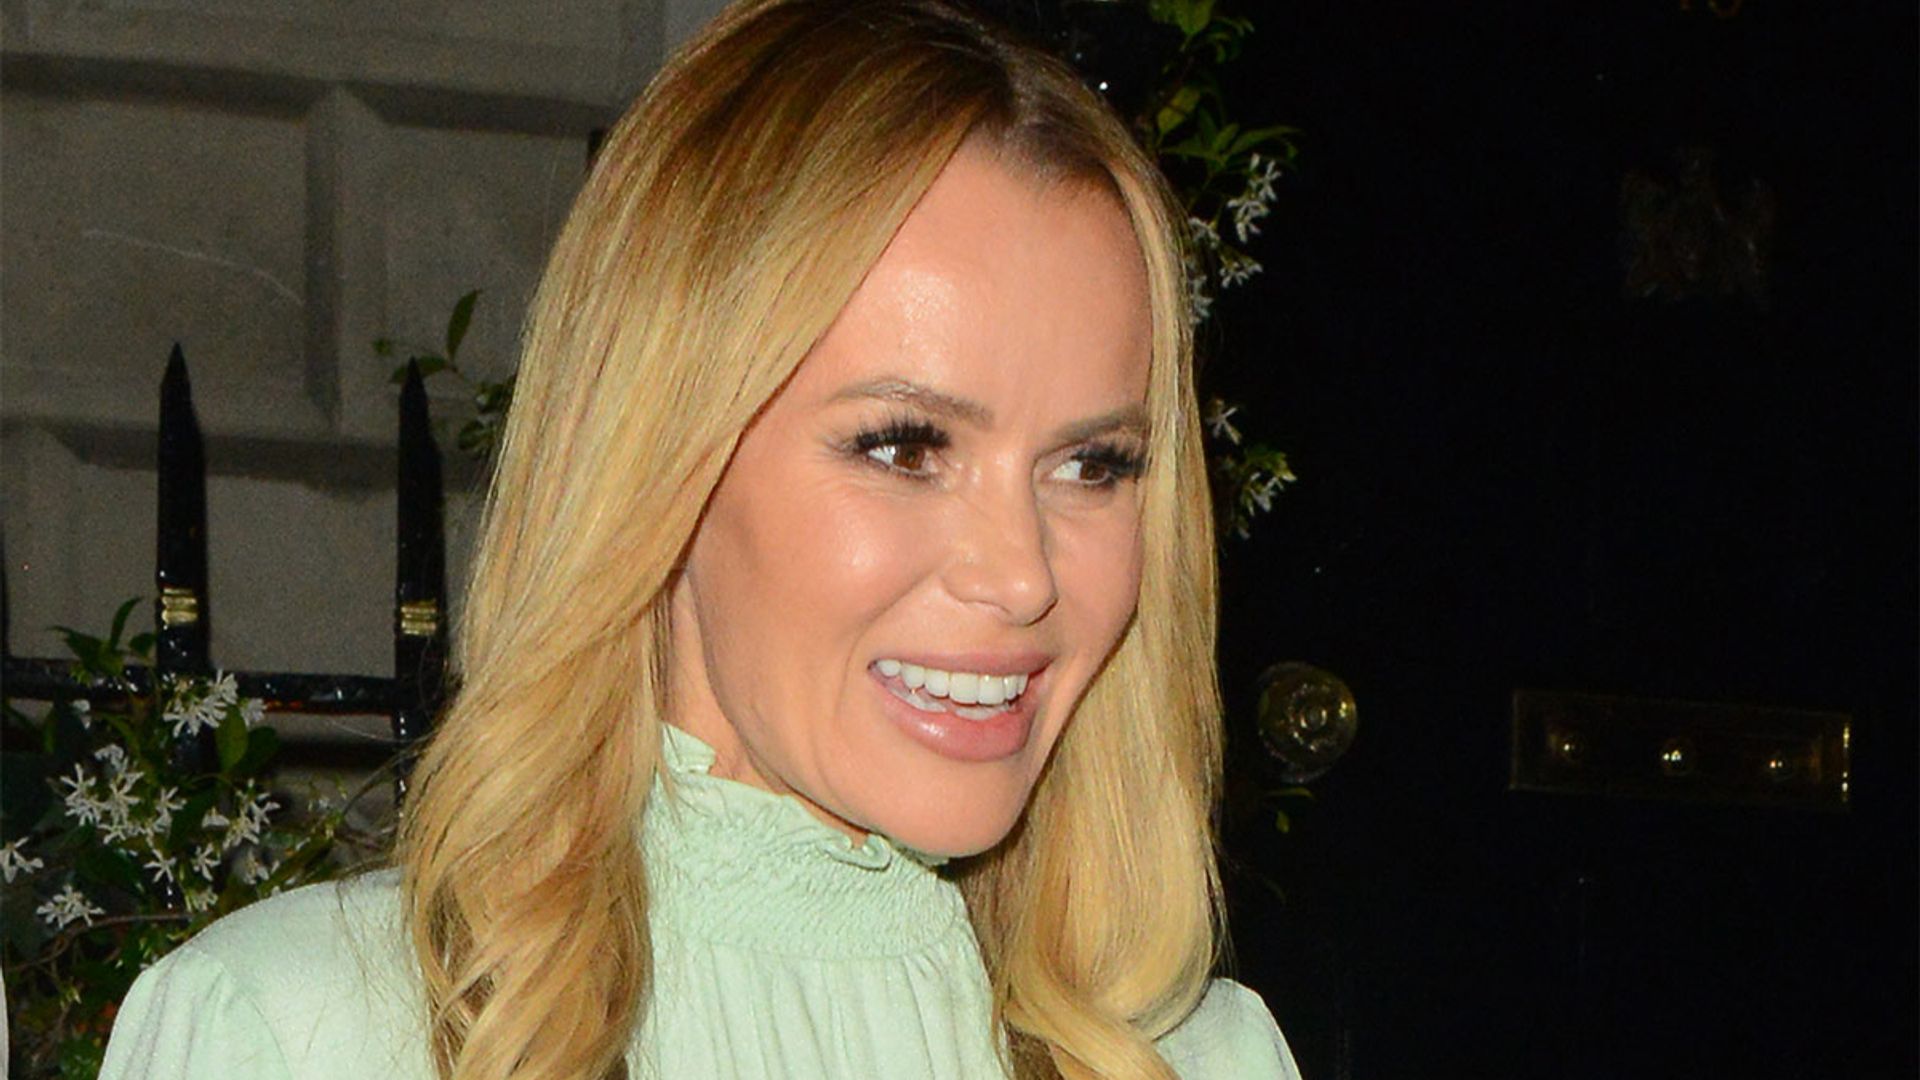 Amanda Holden stuns Instagram in a funky kimono dress - and it has a royal edge